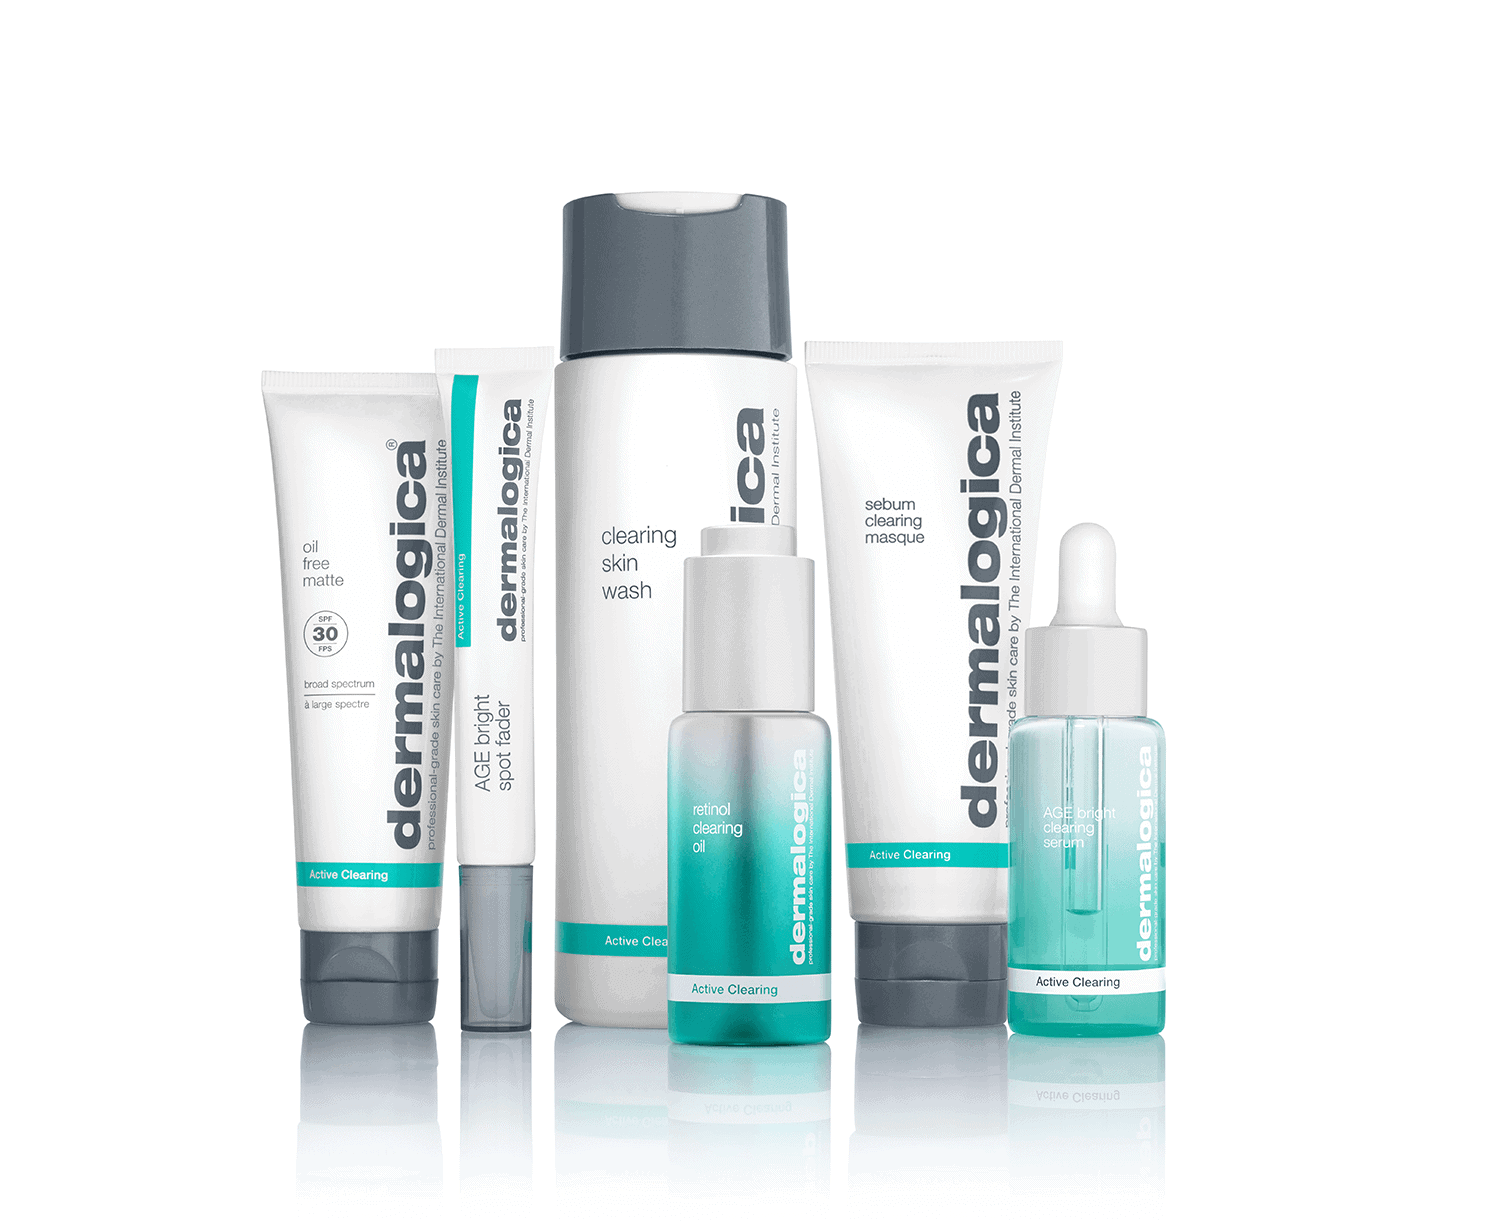 Dermalogica skin care products on a white background.